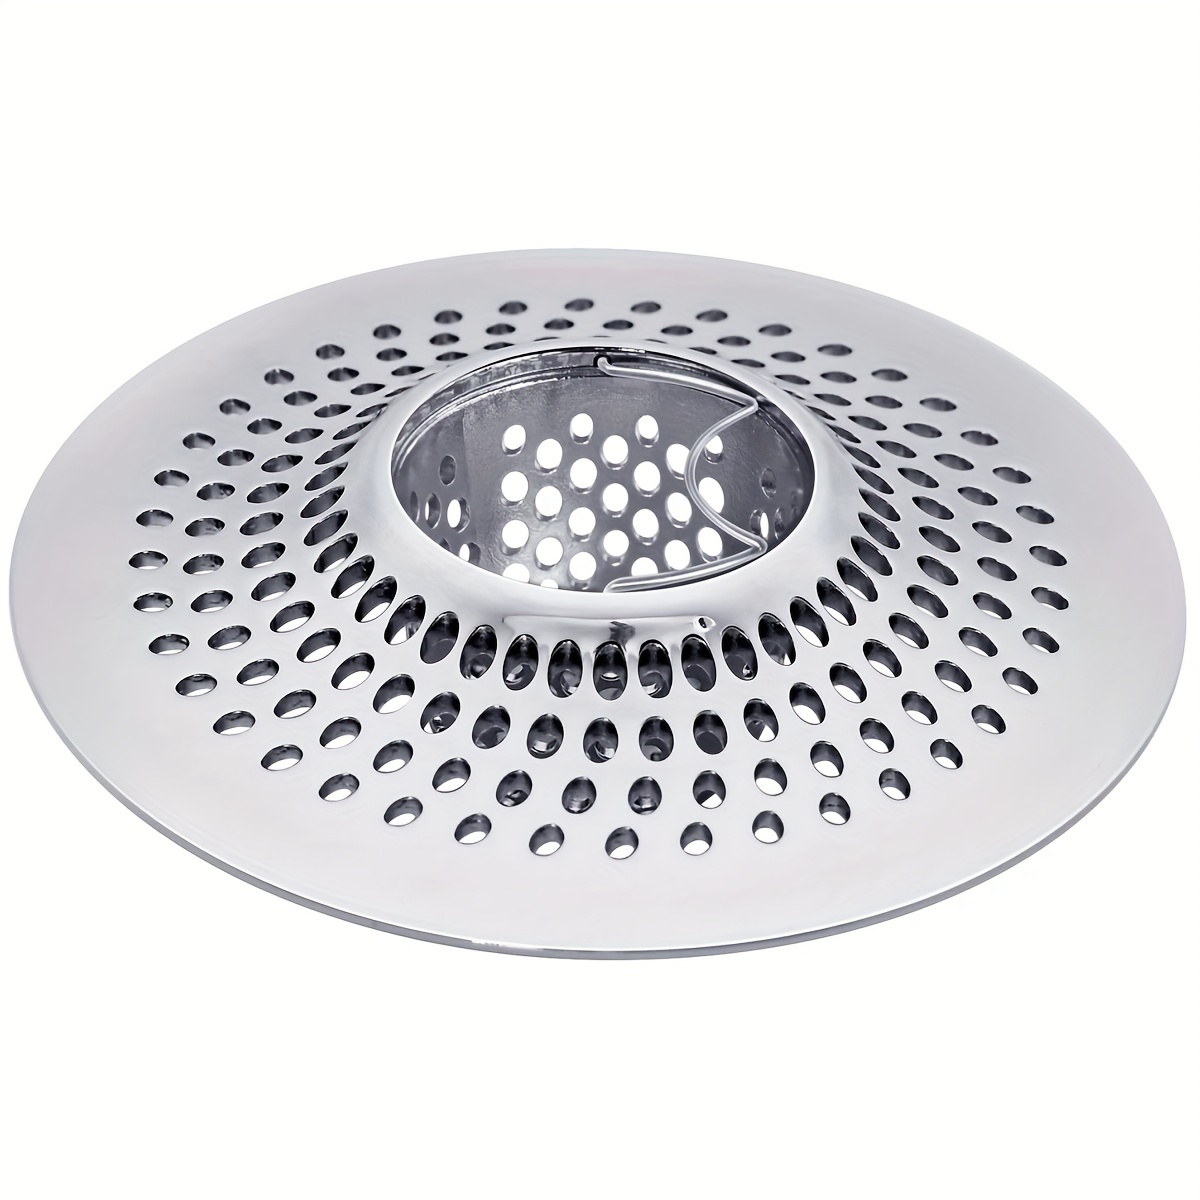 8 Pack Shower Hair Drain Catcher- Shower Hair Catcher Silicone Material is  Easy to Install, Prevent Debris from Clogging The Drain Bathtub Drain  Cover, Suitable for Bathtub and Kitchen